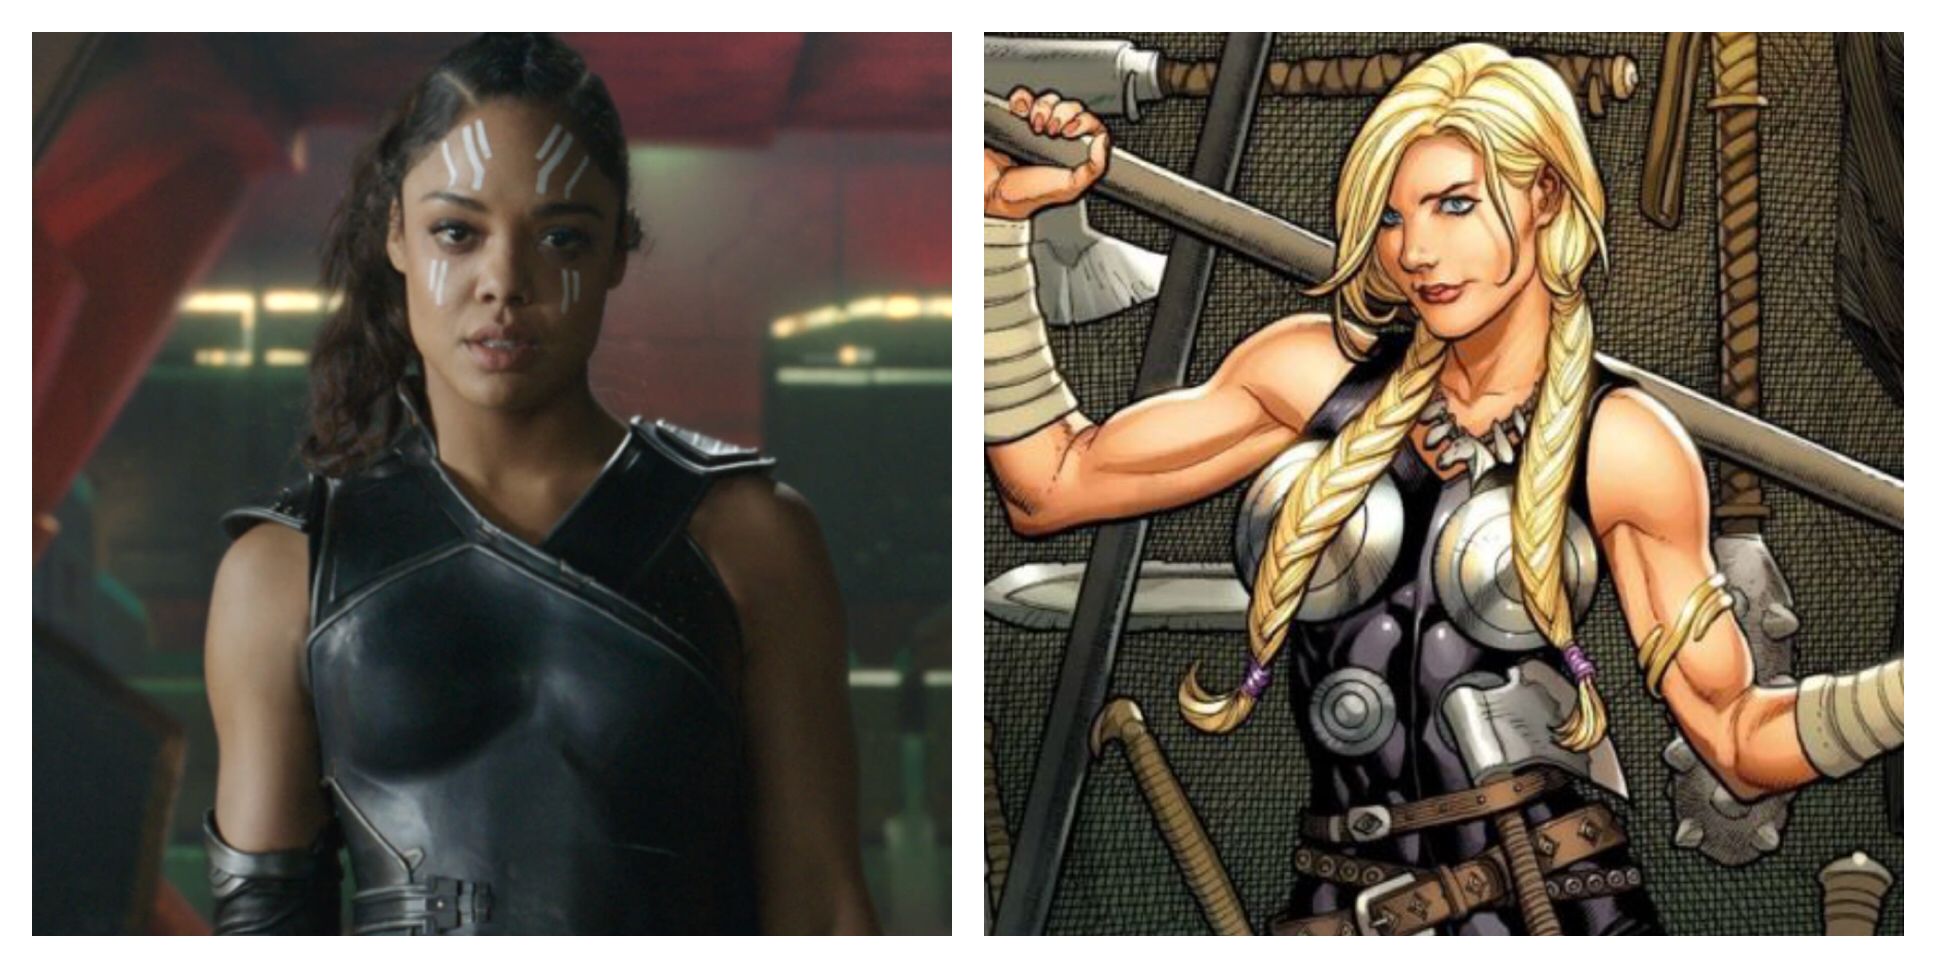 Comic Book Valkyrie is Stronger than MCU Valkyrie